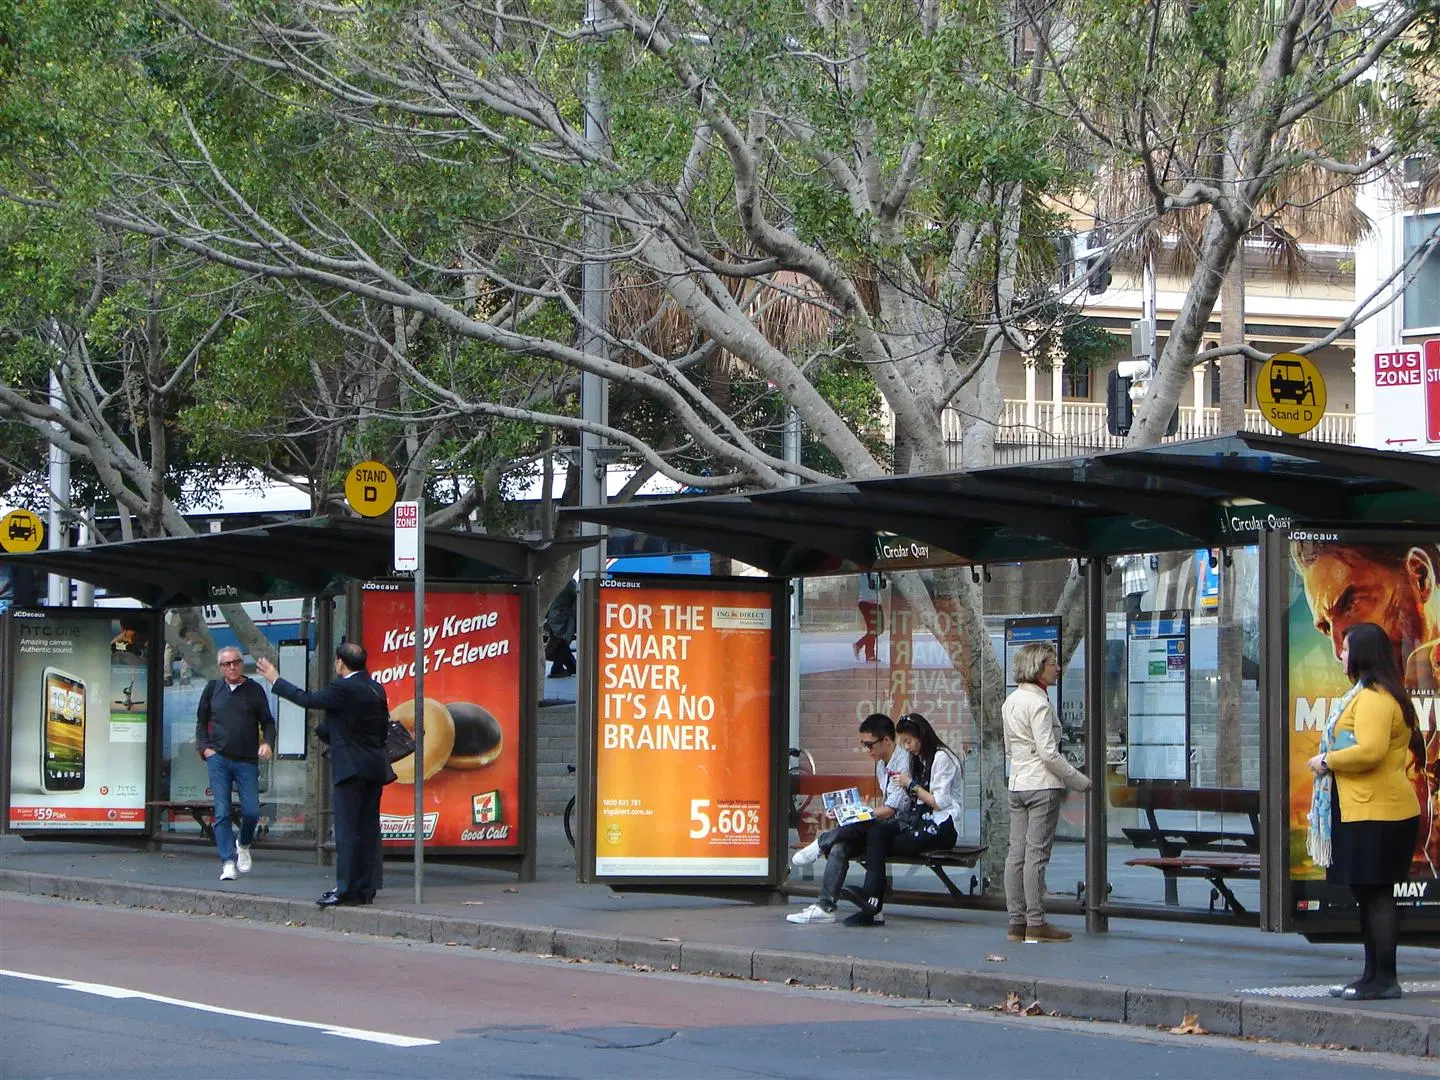 Example of a sheltered bus stop with seating, can accommodate many waiting riders comfortably.